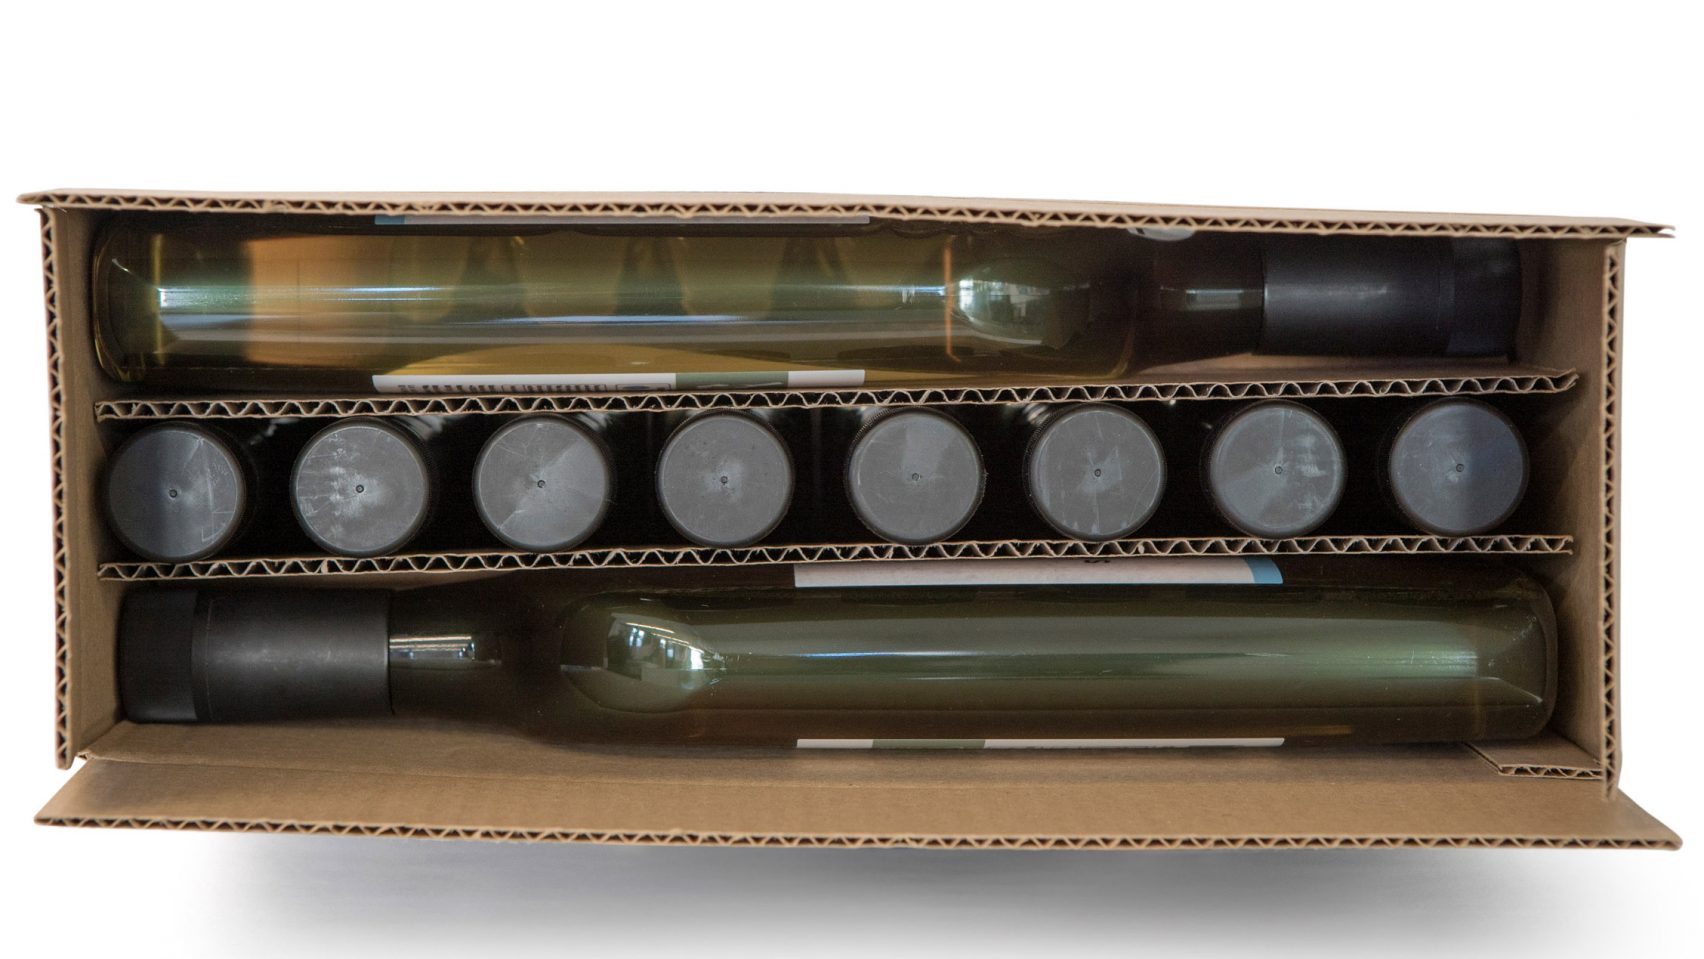 A box shows several flat green bottles of wine packaged.